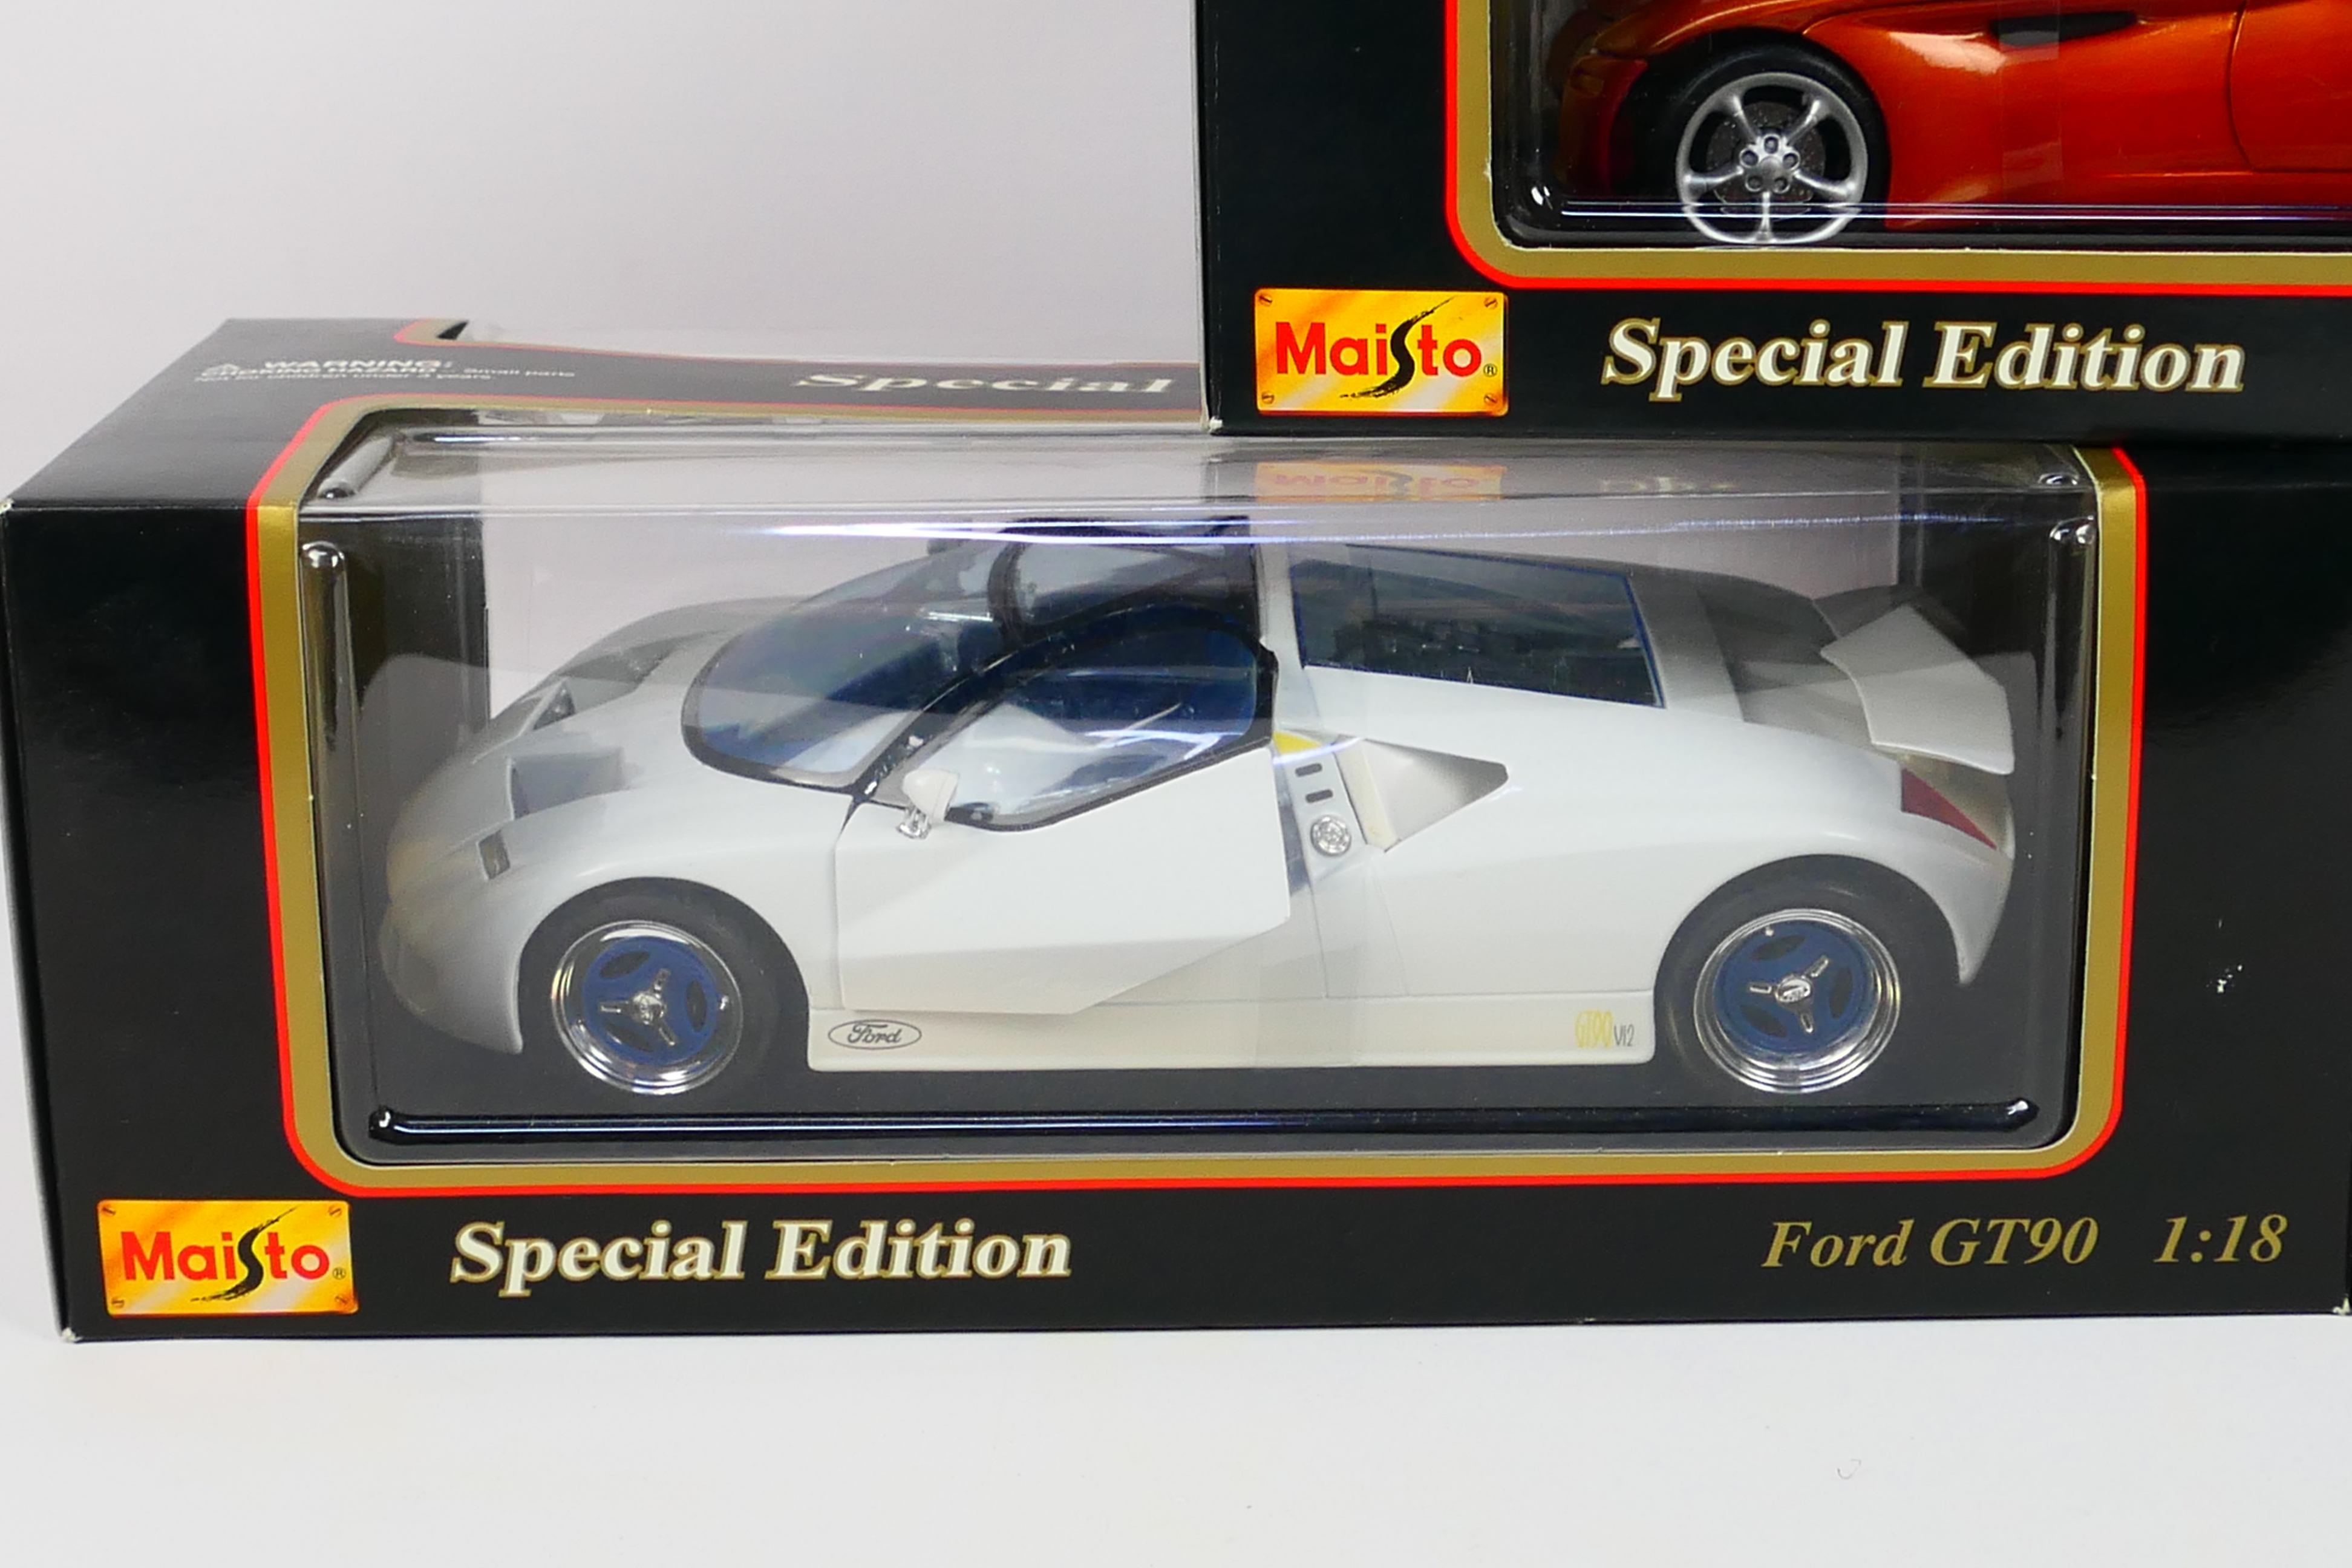 Maisto - Three boxed diecast 1:18 scale model cars from Maisto. - Image 3 of 4